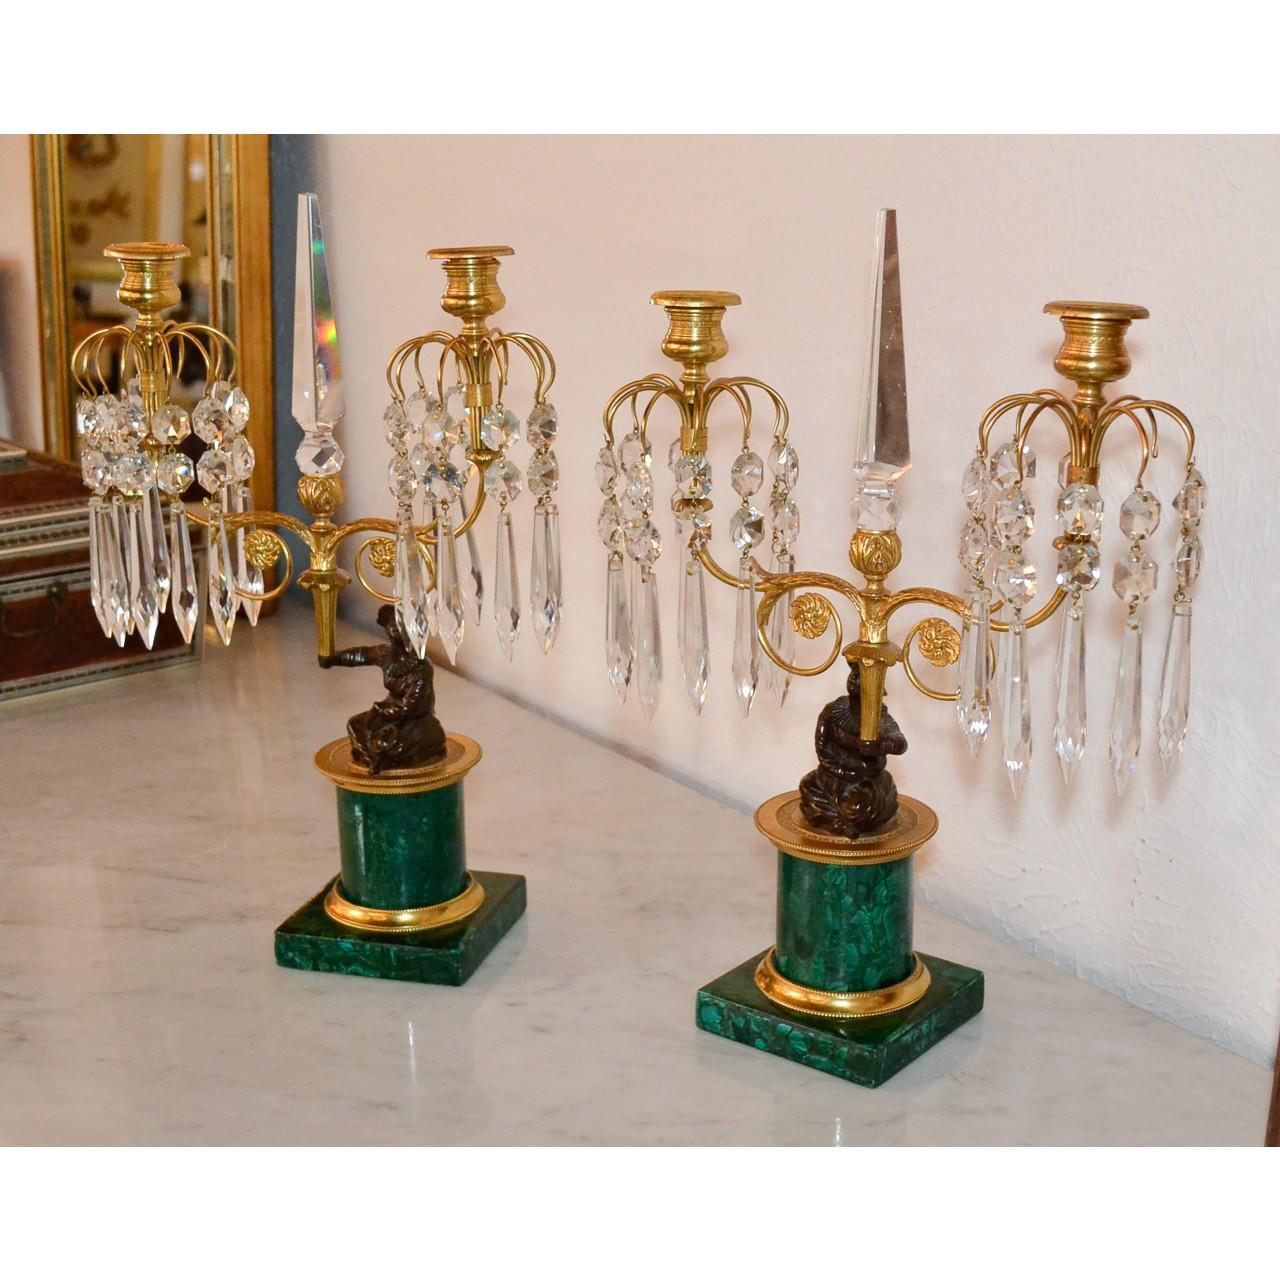 Napoleon III 19th Century Pair of French Figural Candelabras